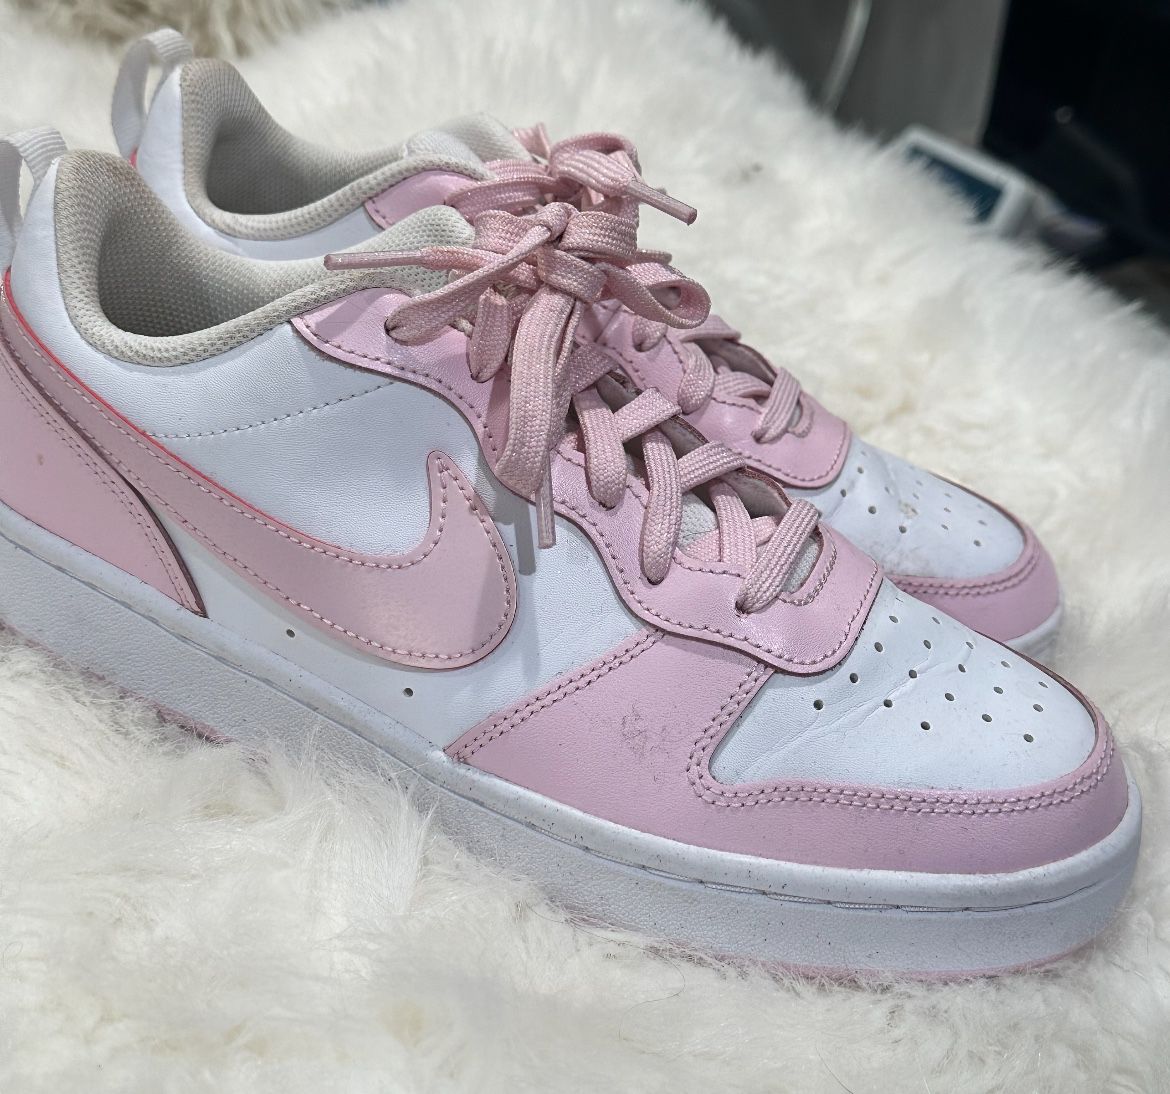 Pink And White Nike (6.5)